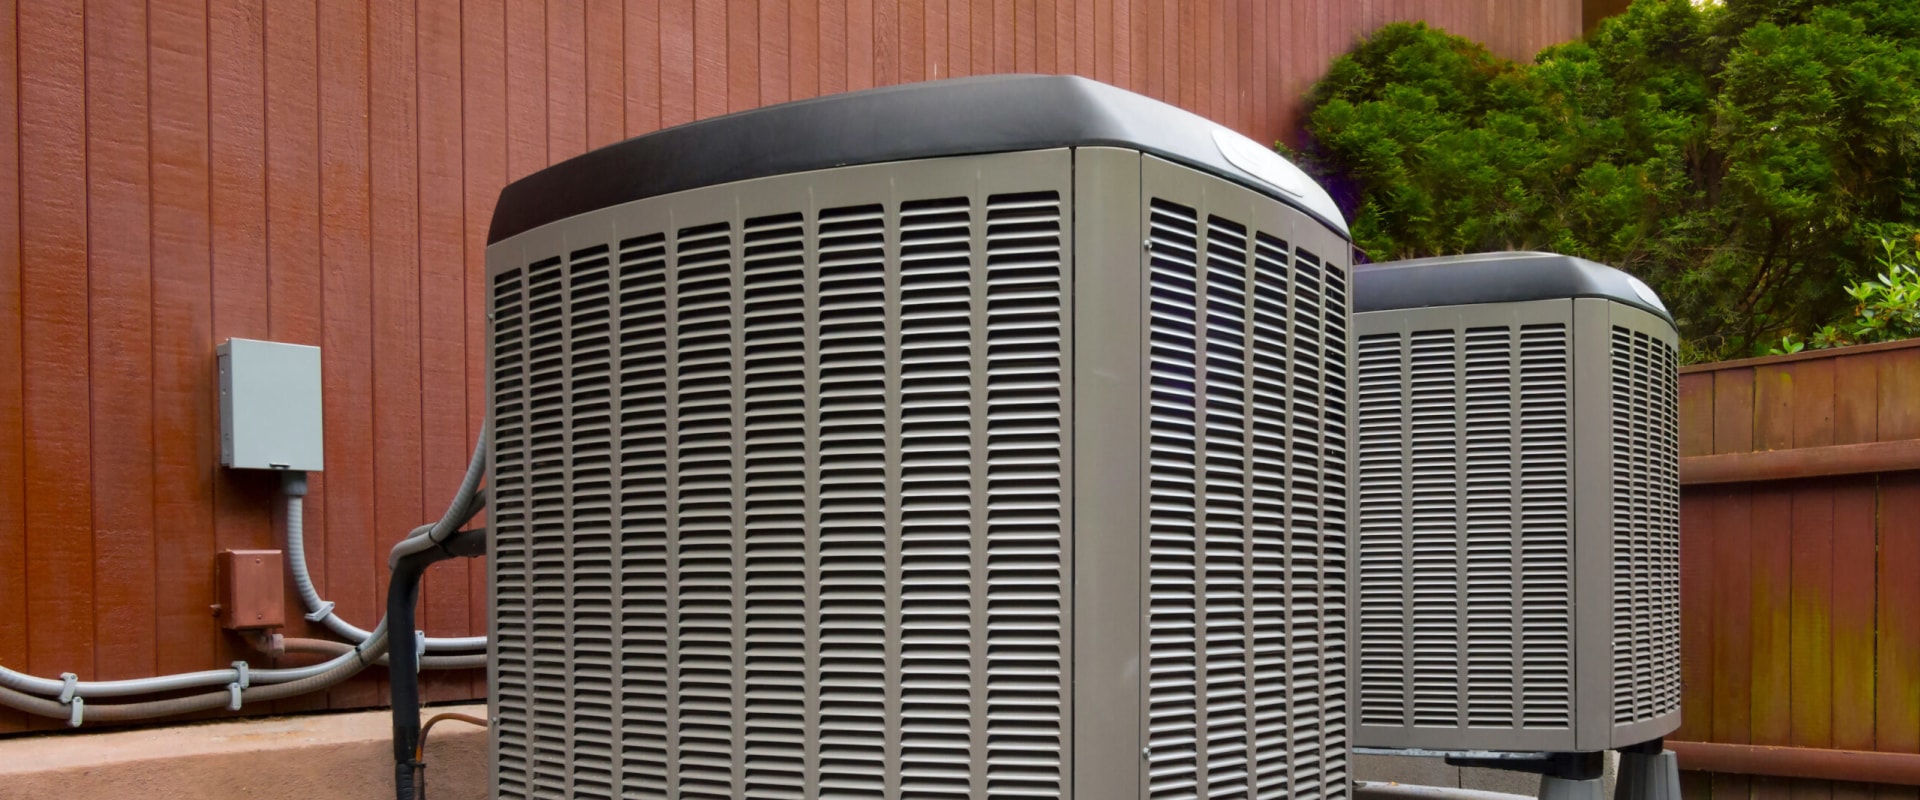 What is the most efficient residential hvac system?